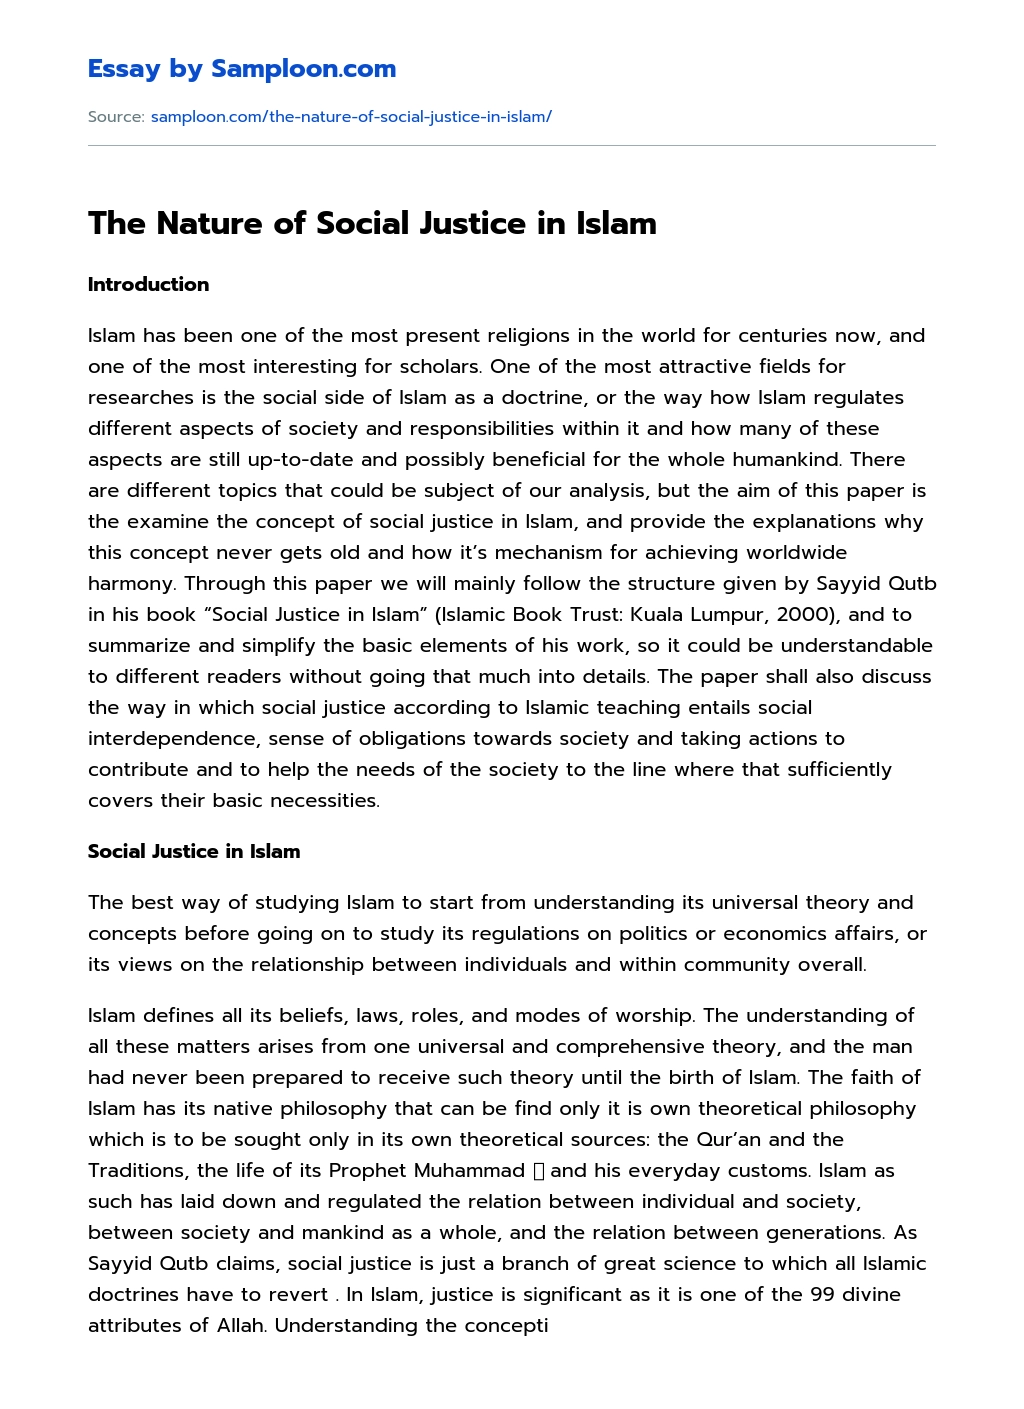 The Nature of Social Justice in Islam essay